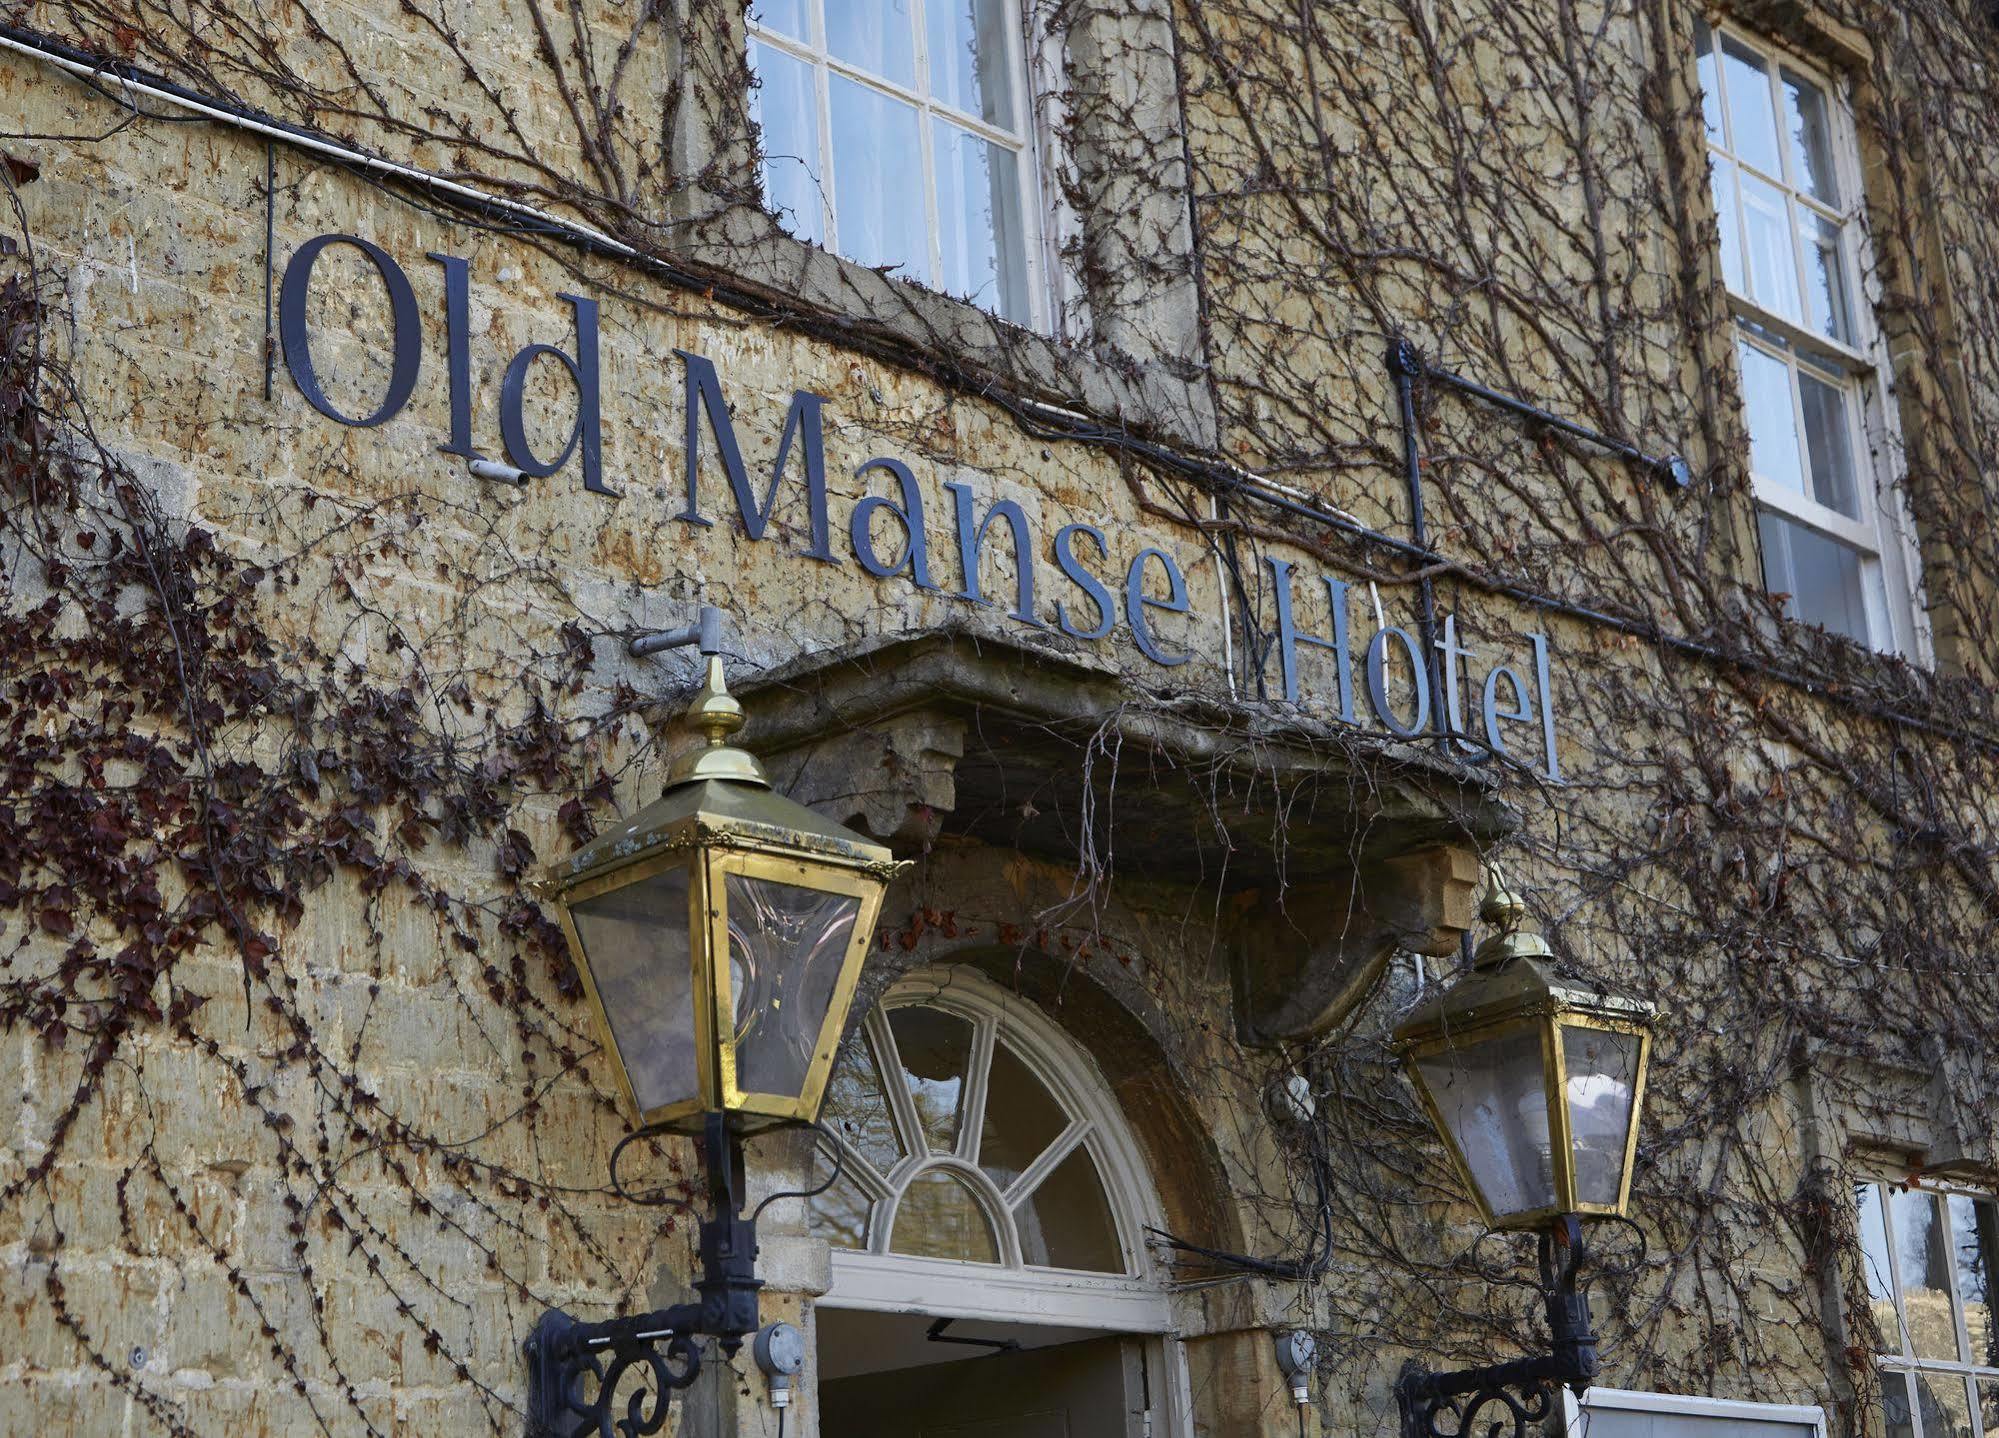 Old Manse Hotel By Greene King Inns Bourton-on-the-Water Exterior foto